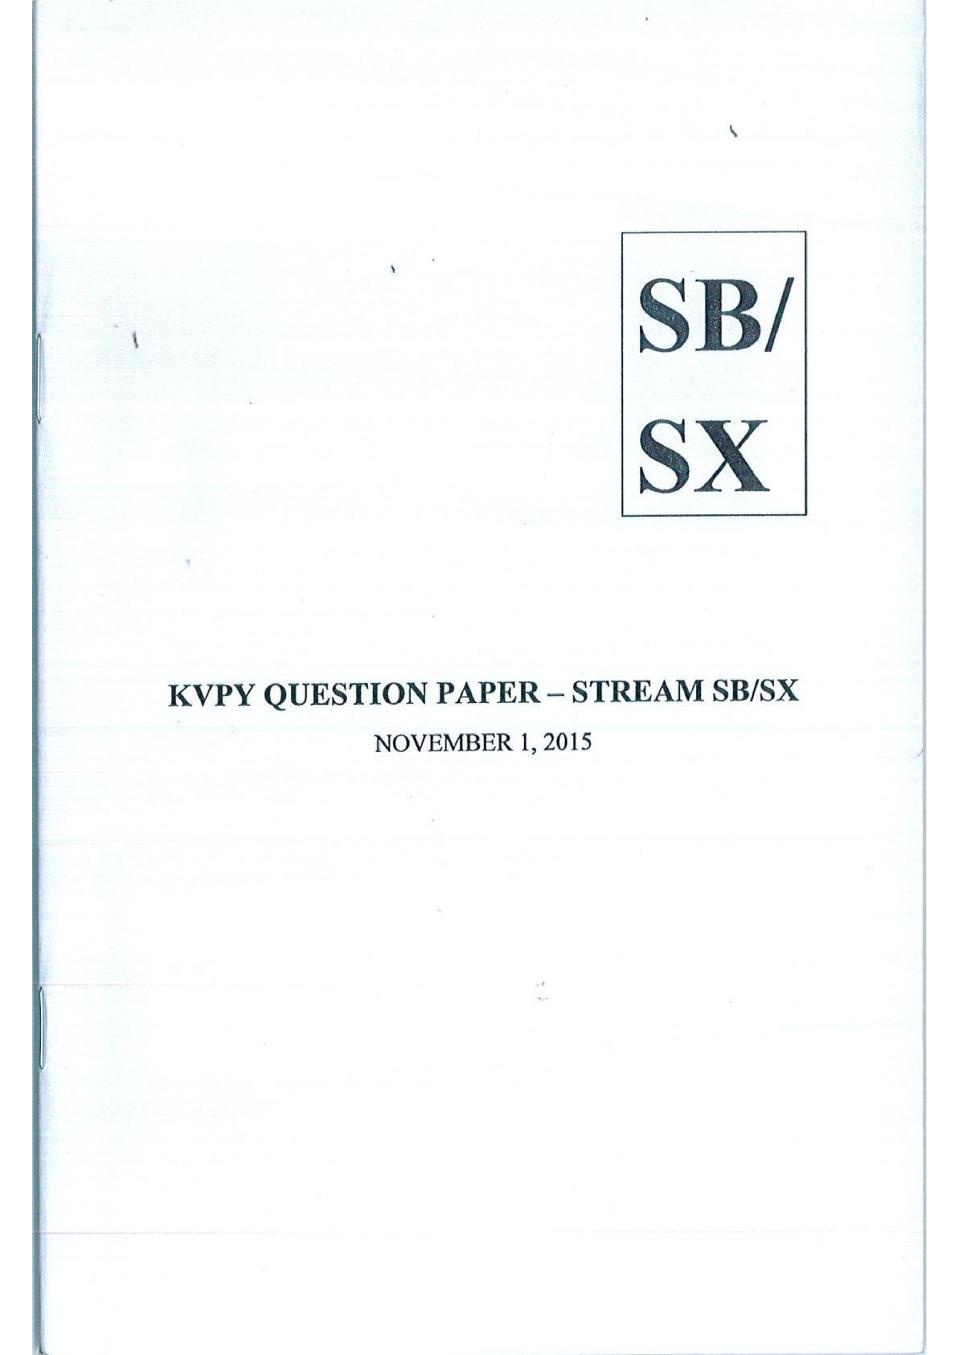 KVPY 2015 Question Paper with Answer Key for SB/SX Stream - Page 1